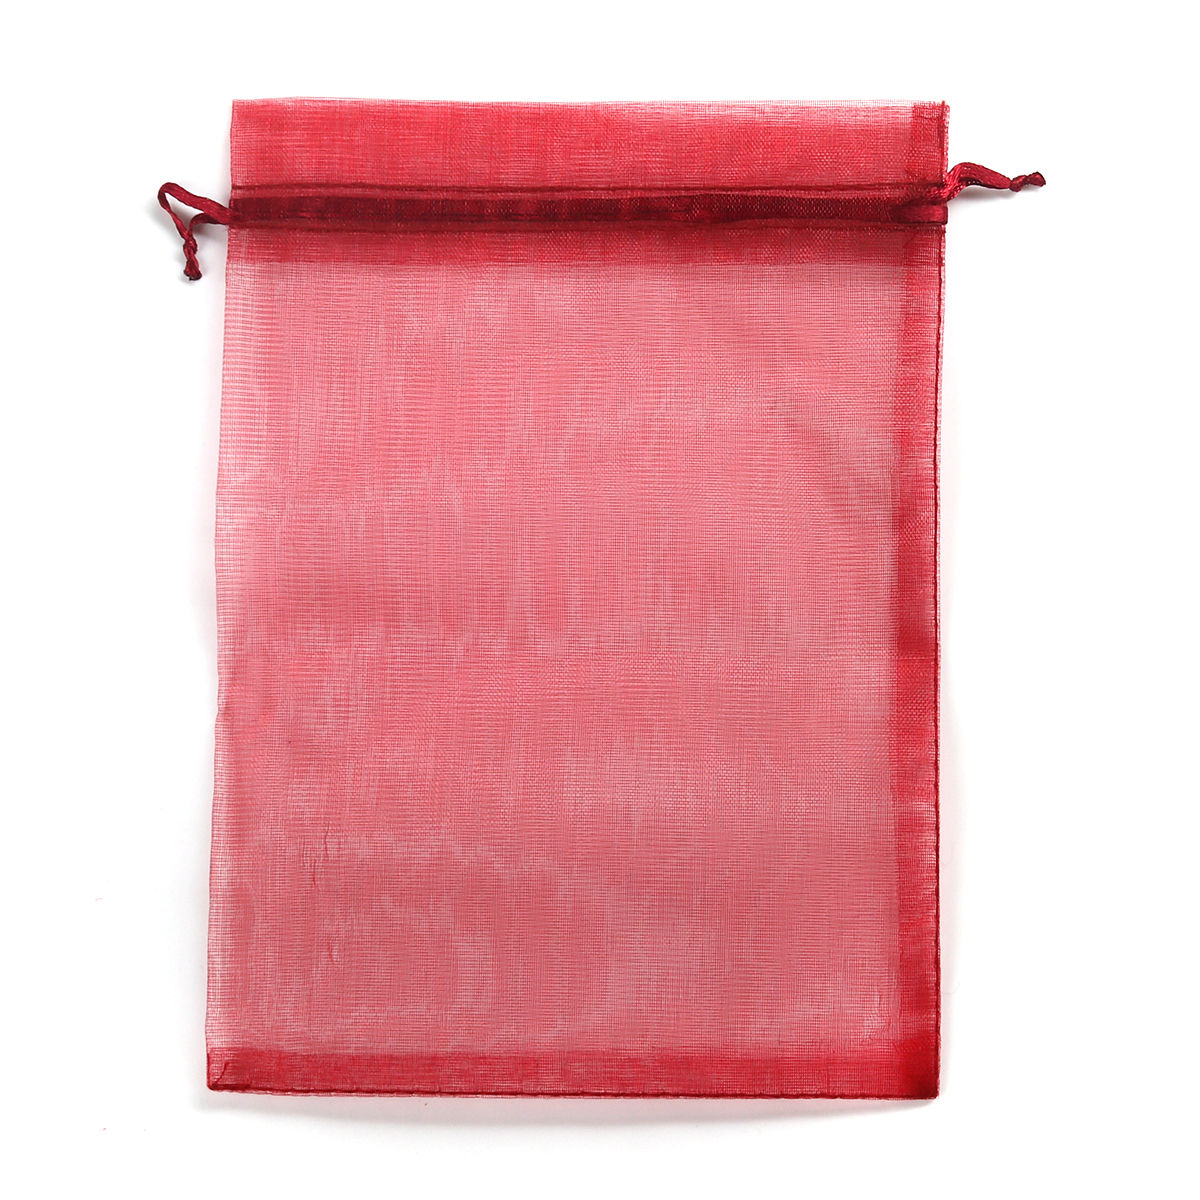 Picture of Wedding Gift Organza Jewelry Bags Drawstring Rectangle Wine Red (Usable Space: 13.5x10.5cm) 16cm x 11cm, 20 PCs